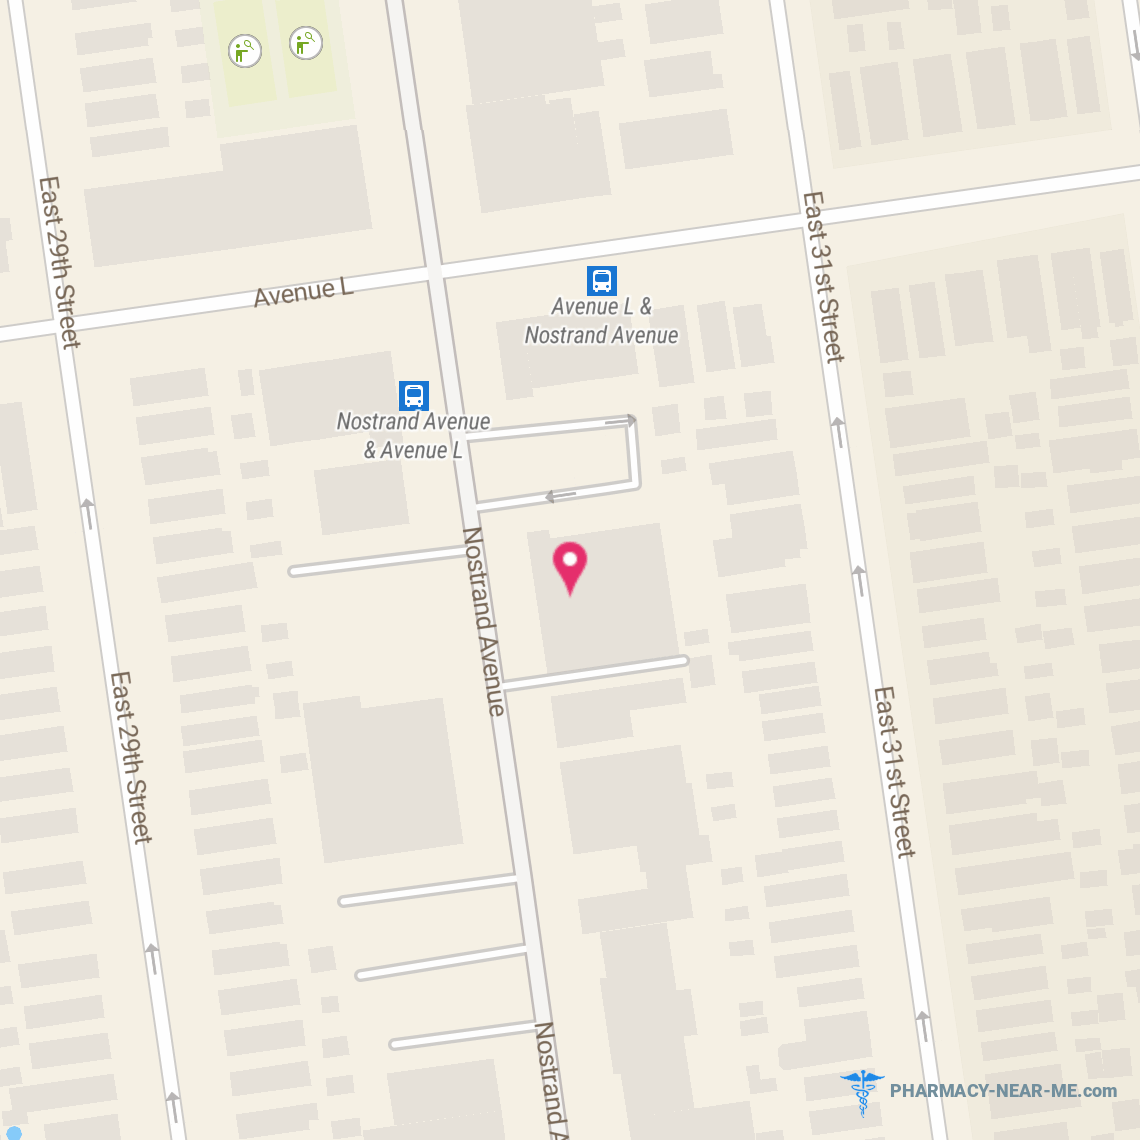 RITE AID - Pharmacy Hours, Phone, Reviews & Information: 2577 Nostrand Avenue, Brooklyn, New York 11210, United States